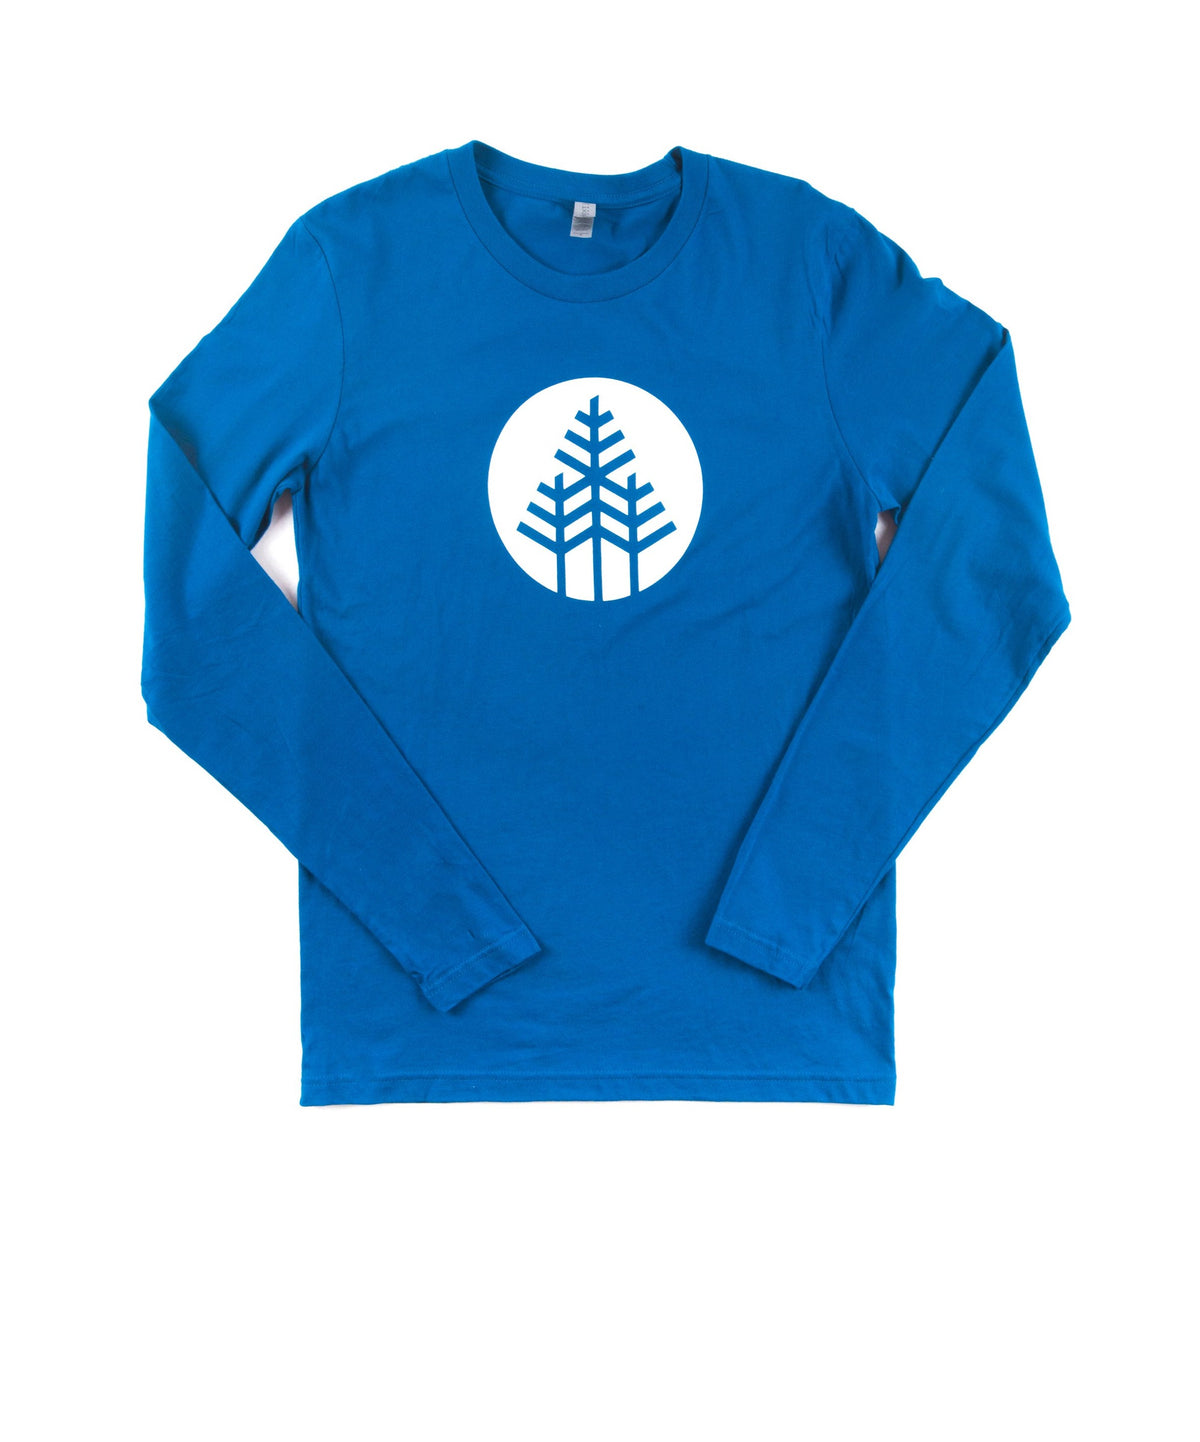 Blue Long Sleeve Shirt with Tree Stamp